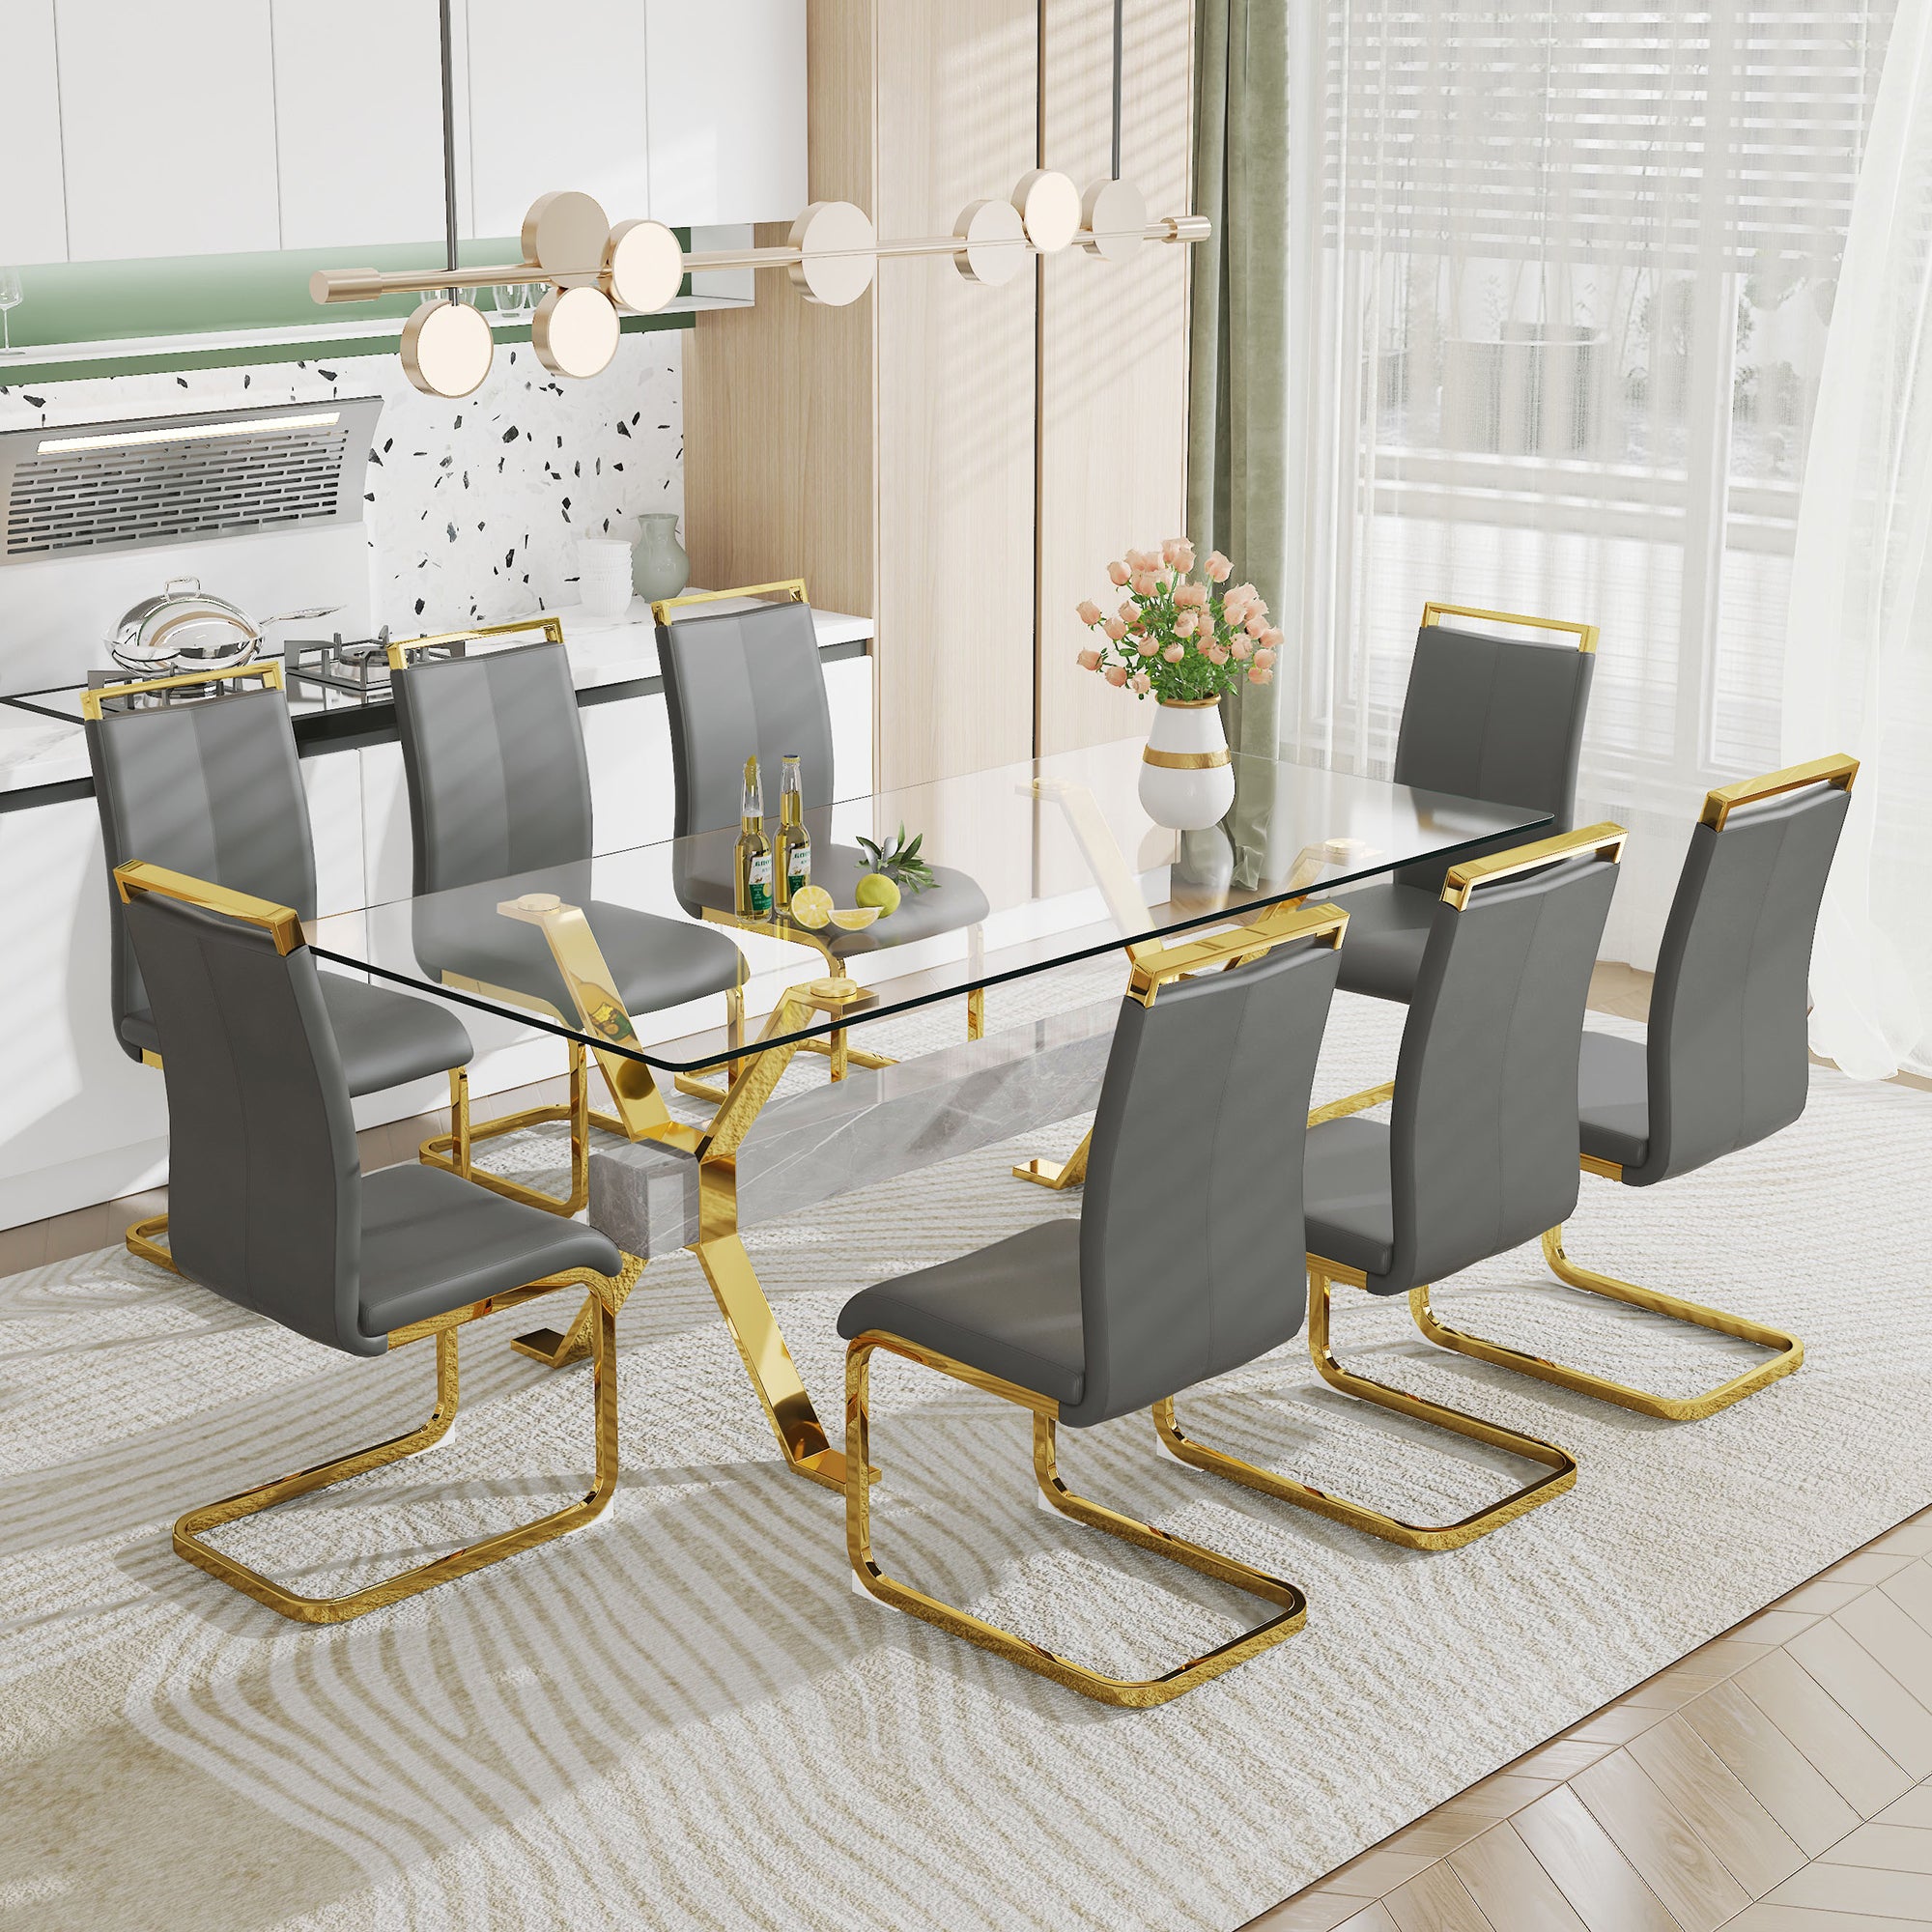 Modern Tempered Glass Dining Table - Transparent with Gold Plated Metal Legs (no chairs included))